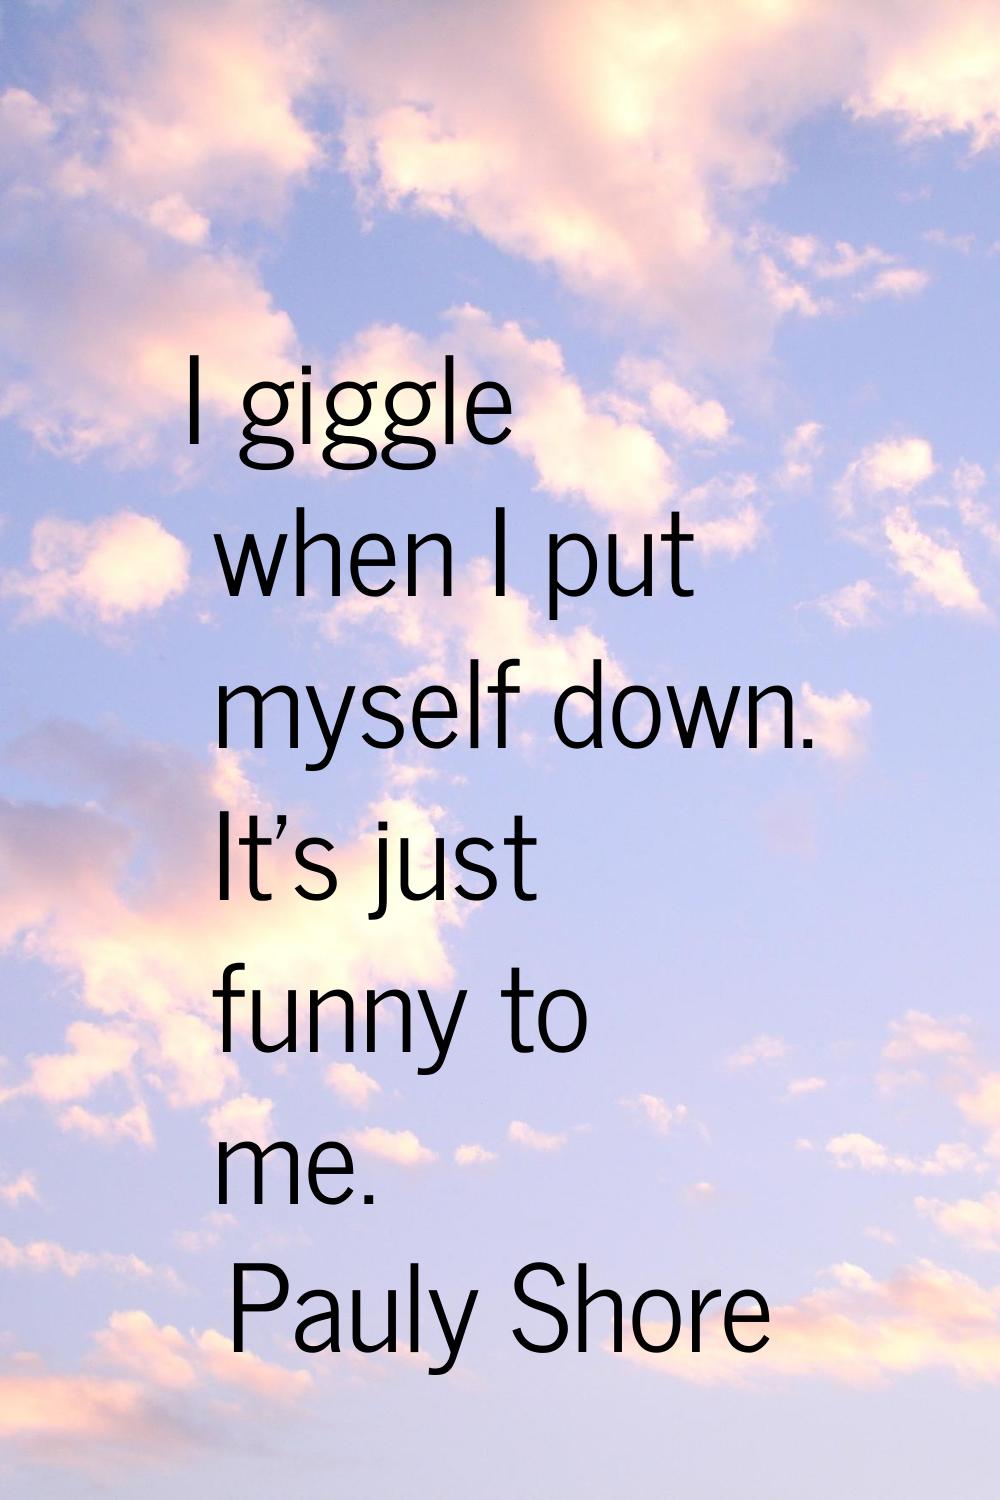 I giggle when I put myself down. It's just funny to me.